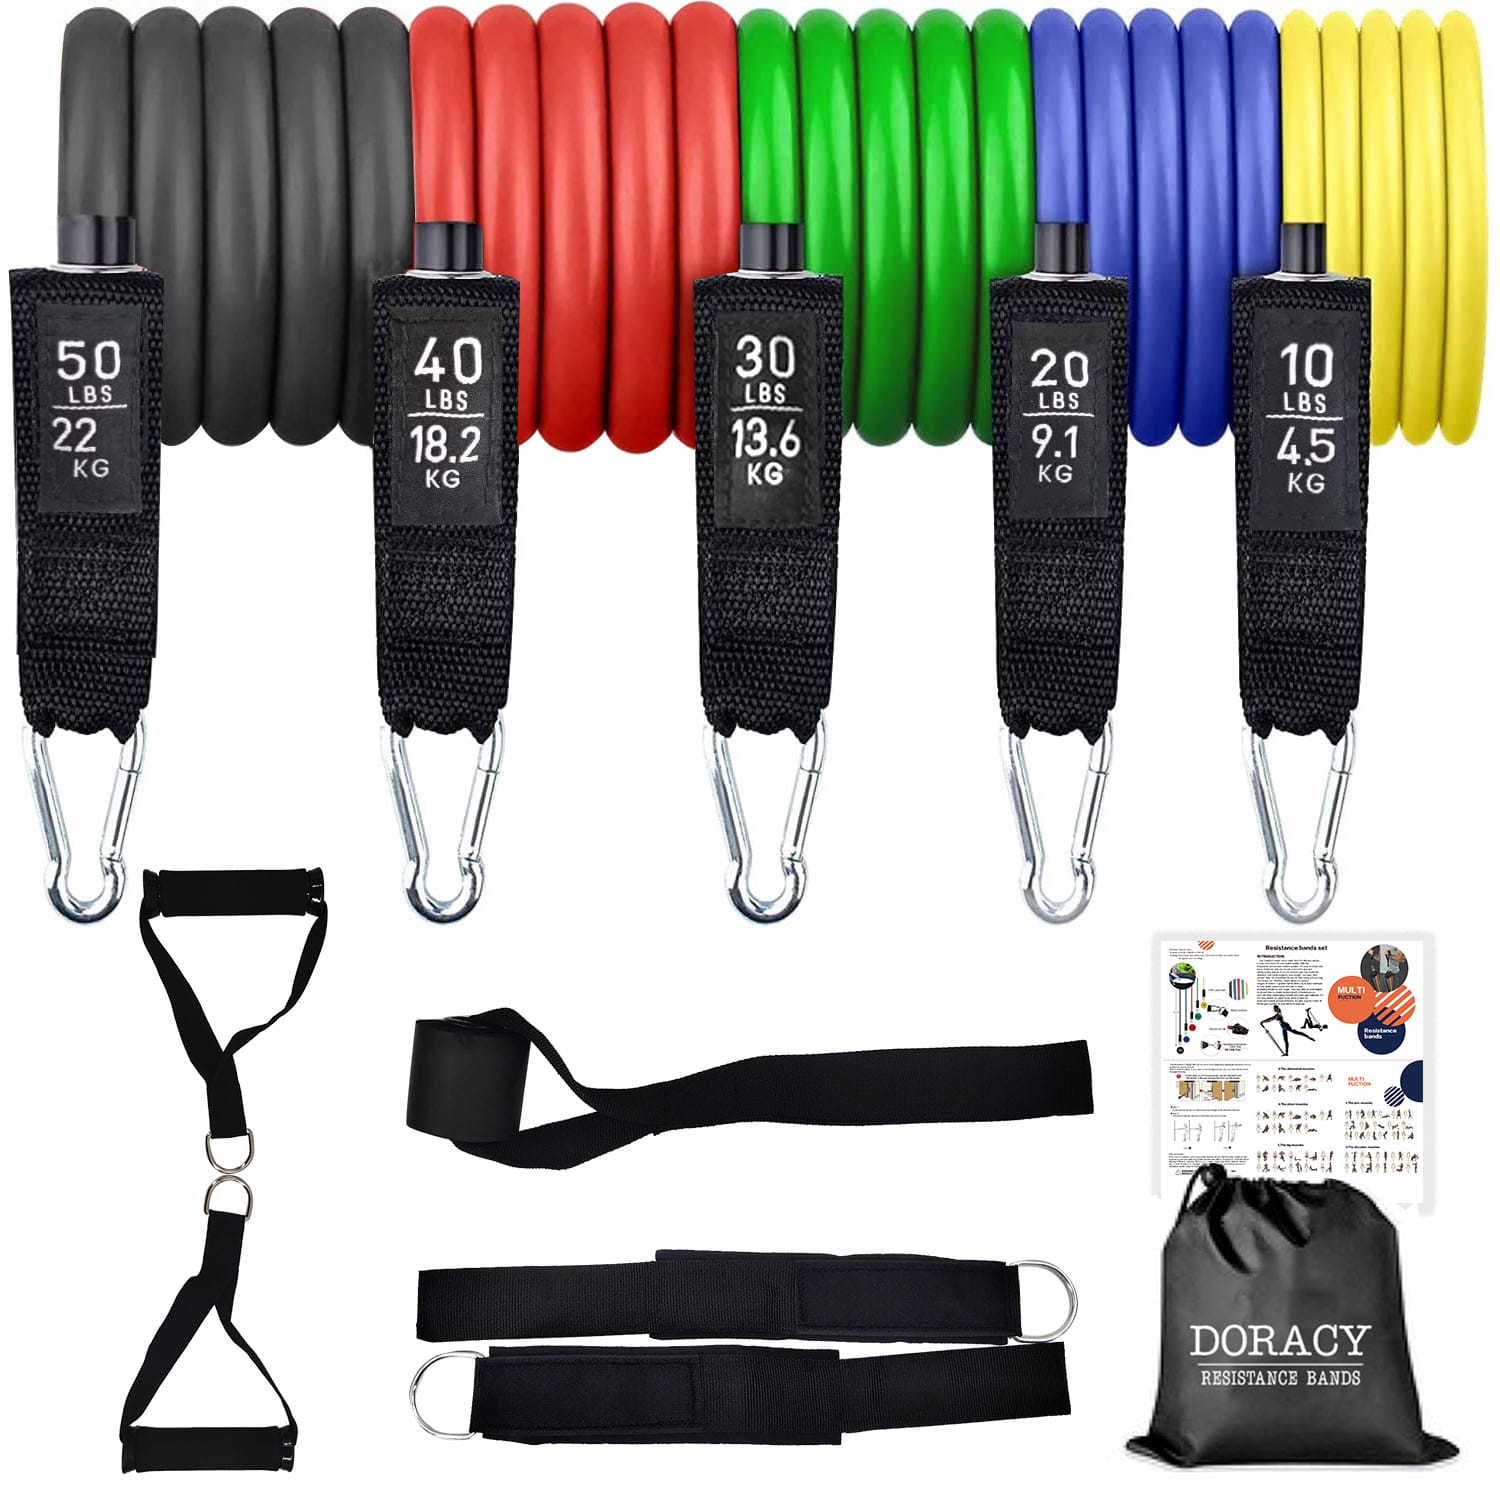 Doracy Exercise Resistance Band Sets 12 pcs, Stackable 5 Training Tubes up to 150 lbs With Comfortable Handles, Ankle Straps, Door Anchor, Carrying Bag, Home and Gym Workout Guide